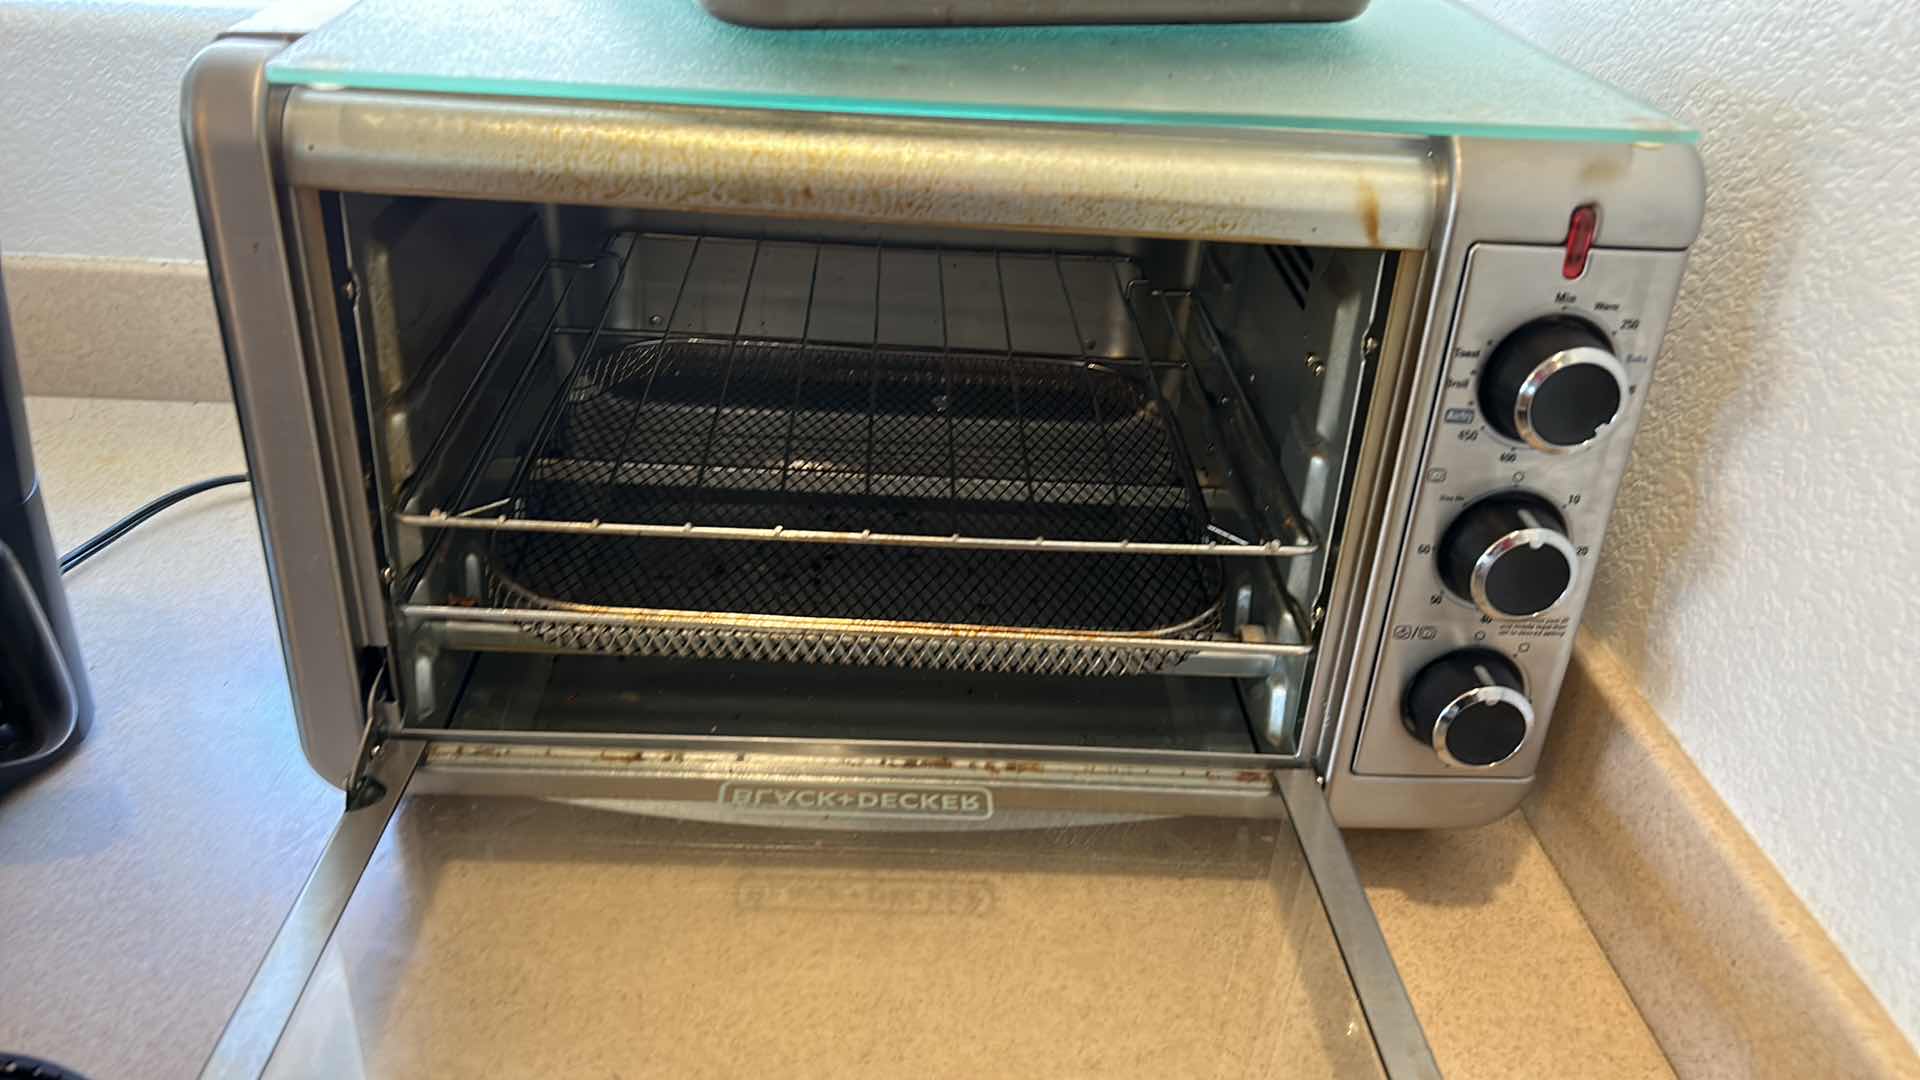 Photo 5 of KITCHEN APPLIANCES - BLACK AND DECKER TOASTER OVEN, COFFEE MAKER AND ACCESSORIES